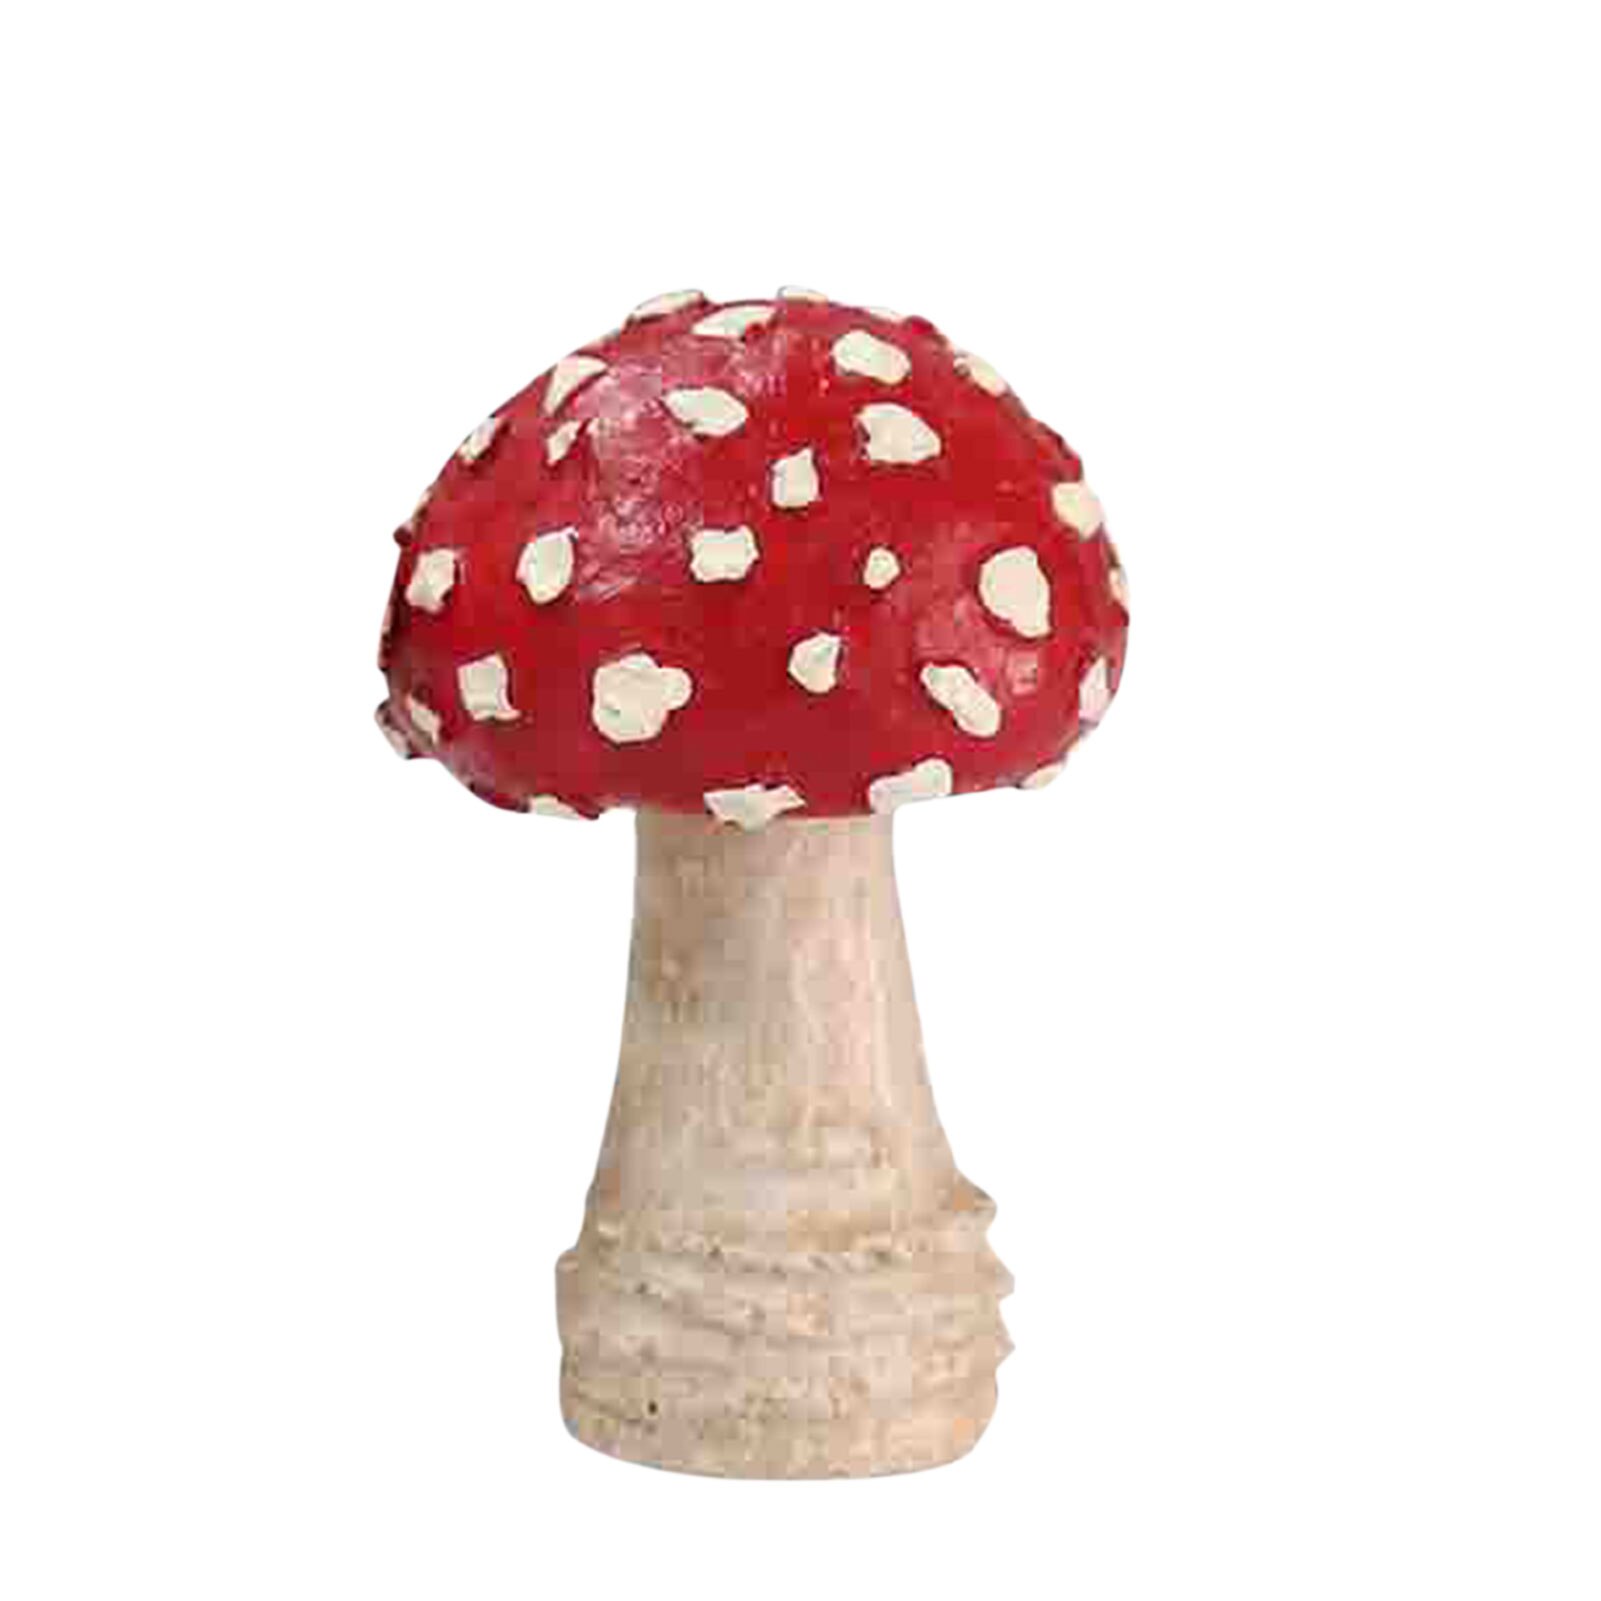 Simulation Resin Mushroom Garden Decoration Mushroom Statue perfect for home lawn or garden exquisite and compact